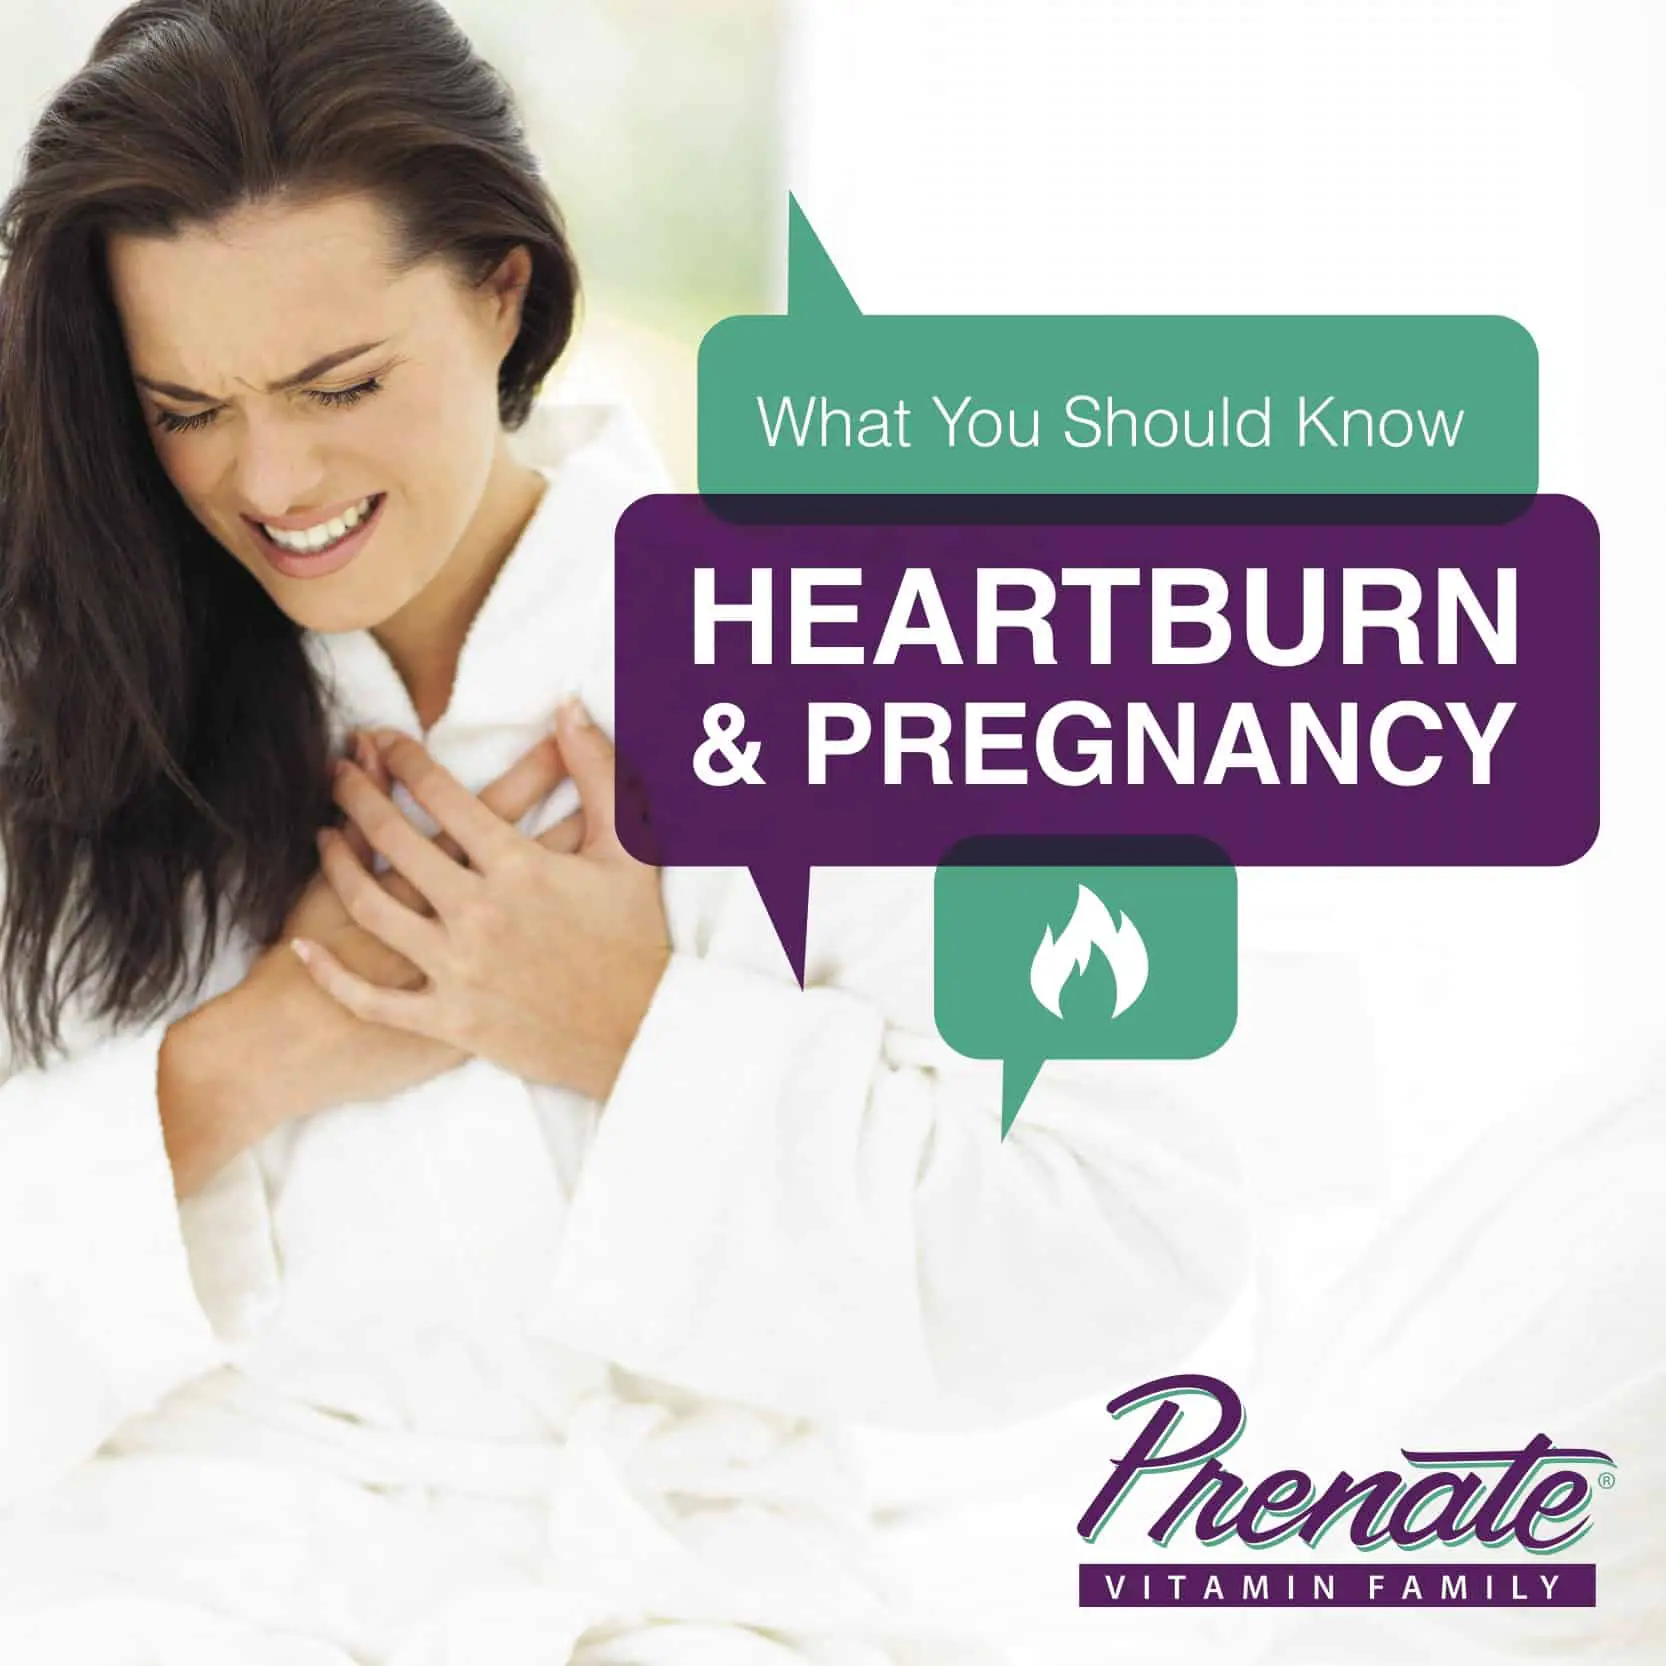 Heartburn and Pregnancy: What You Should Know